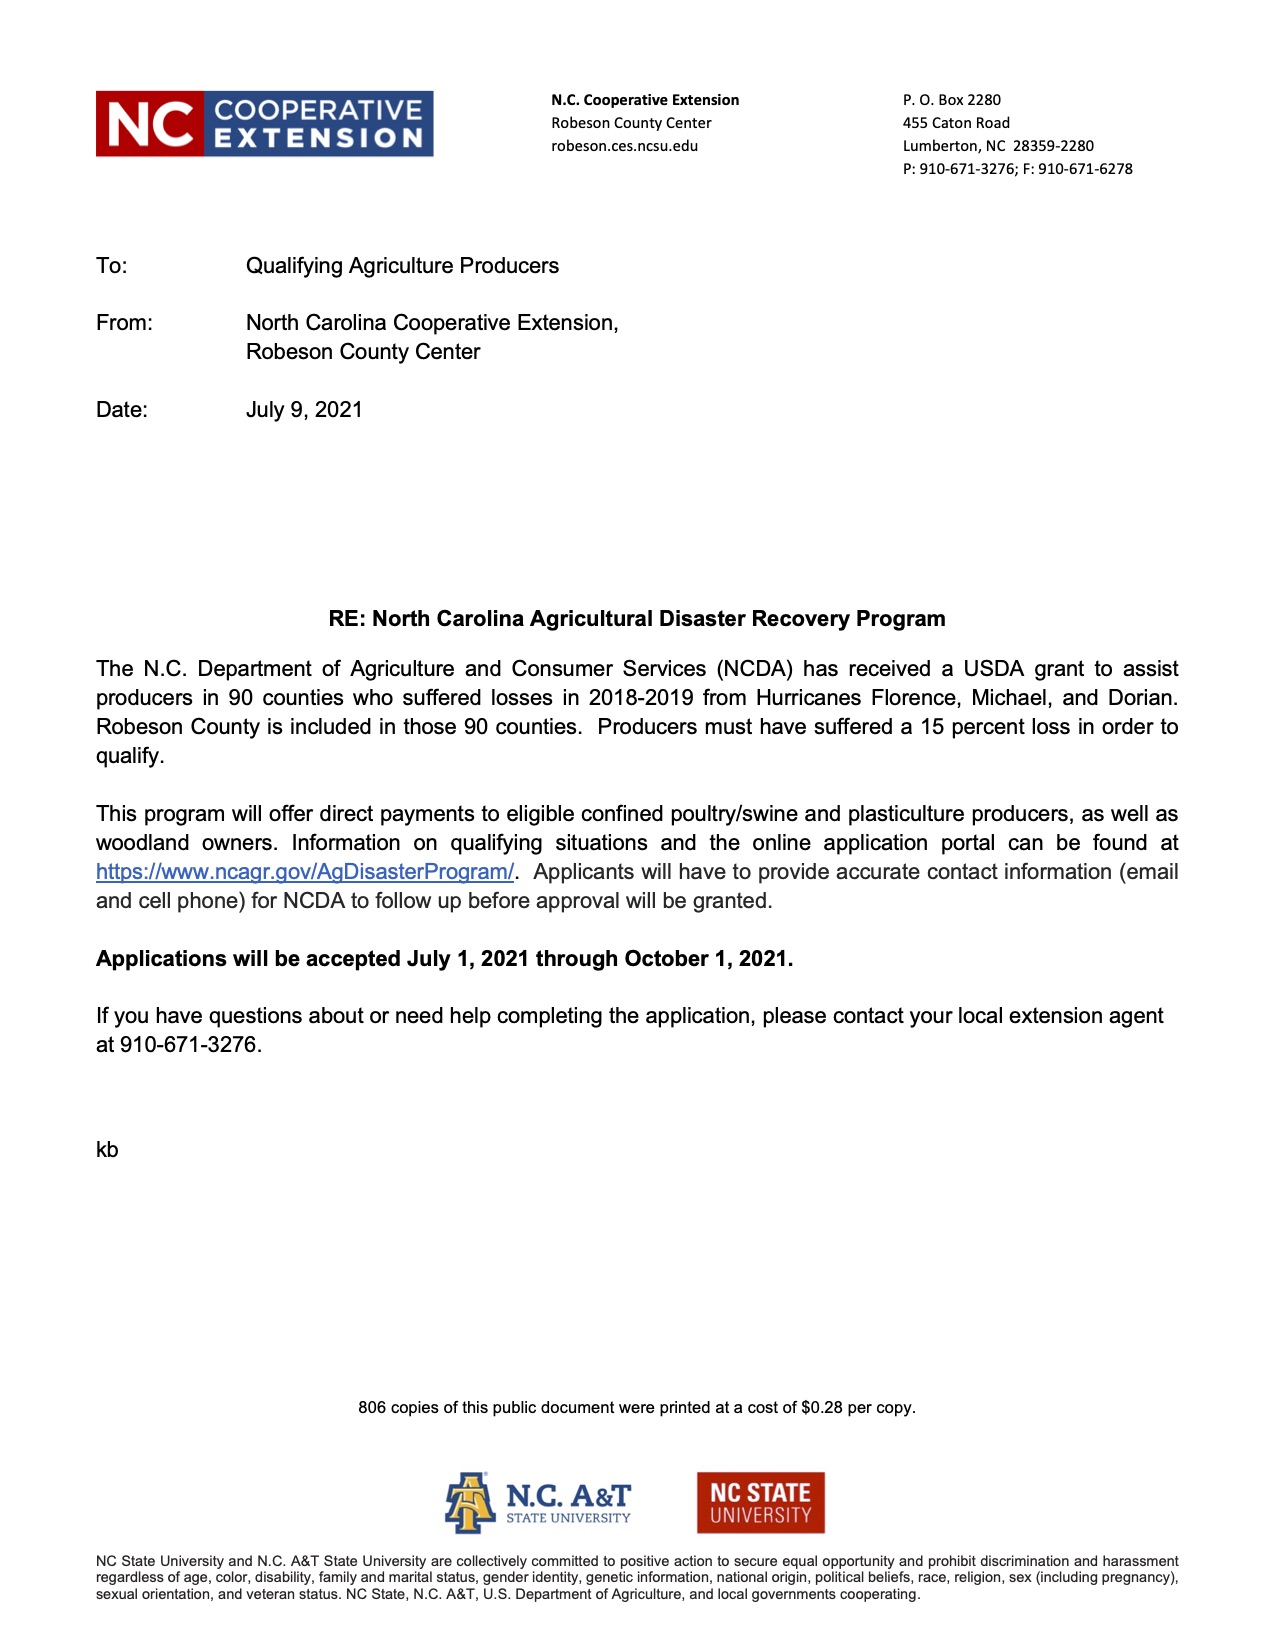 Memo about disaster recovery program